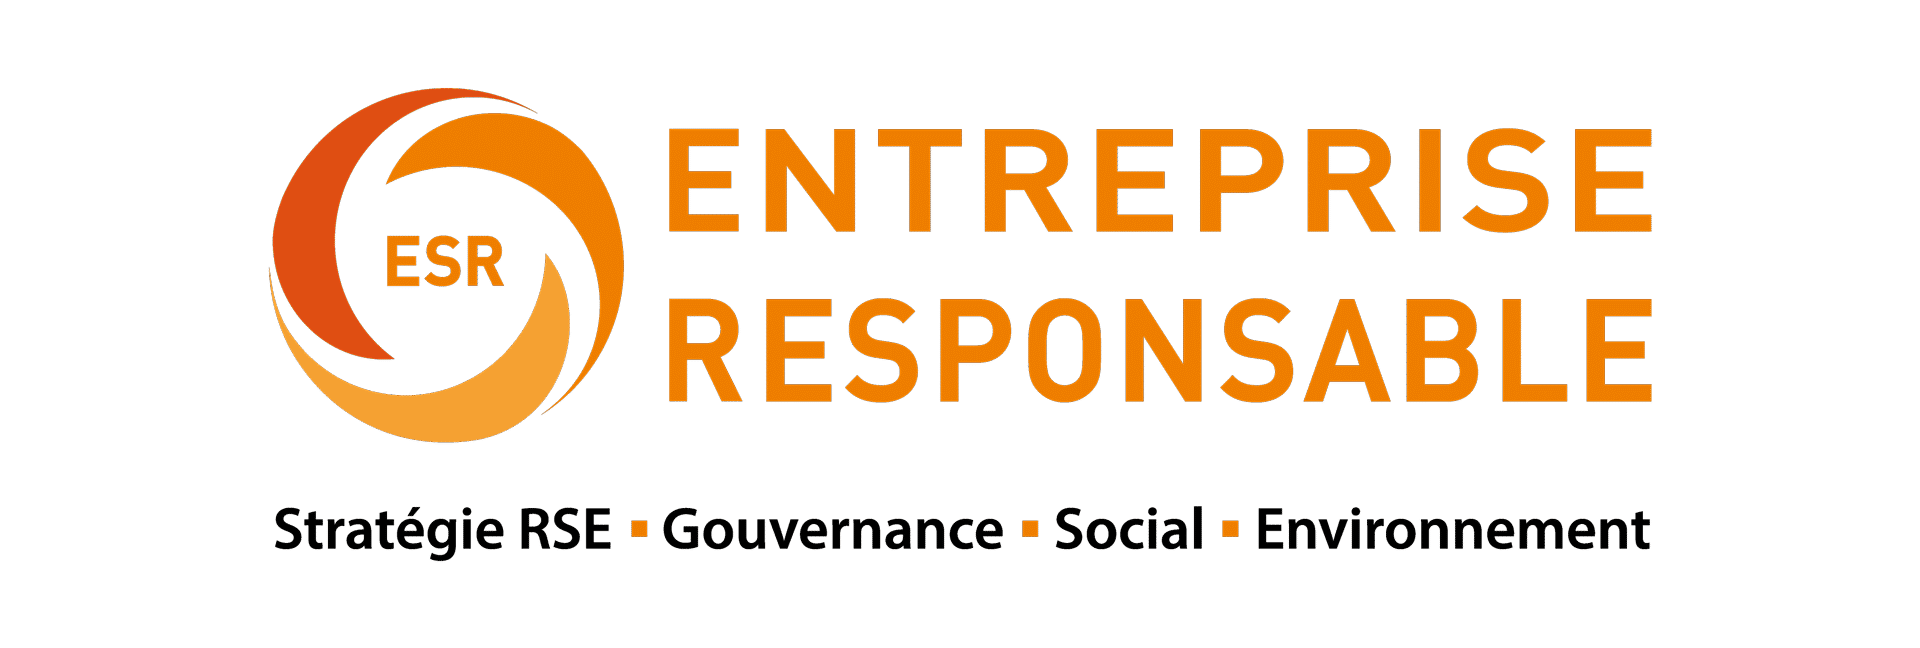 Socially Responsible Business Accreditation